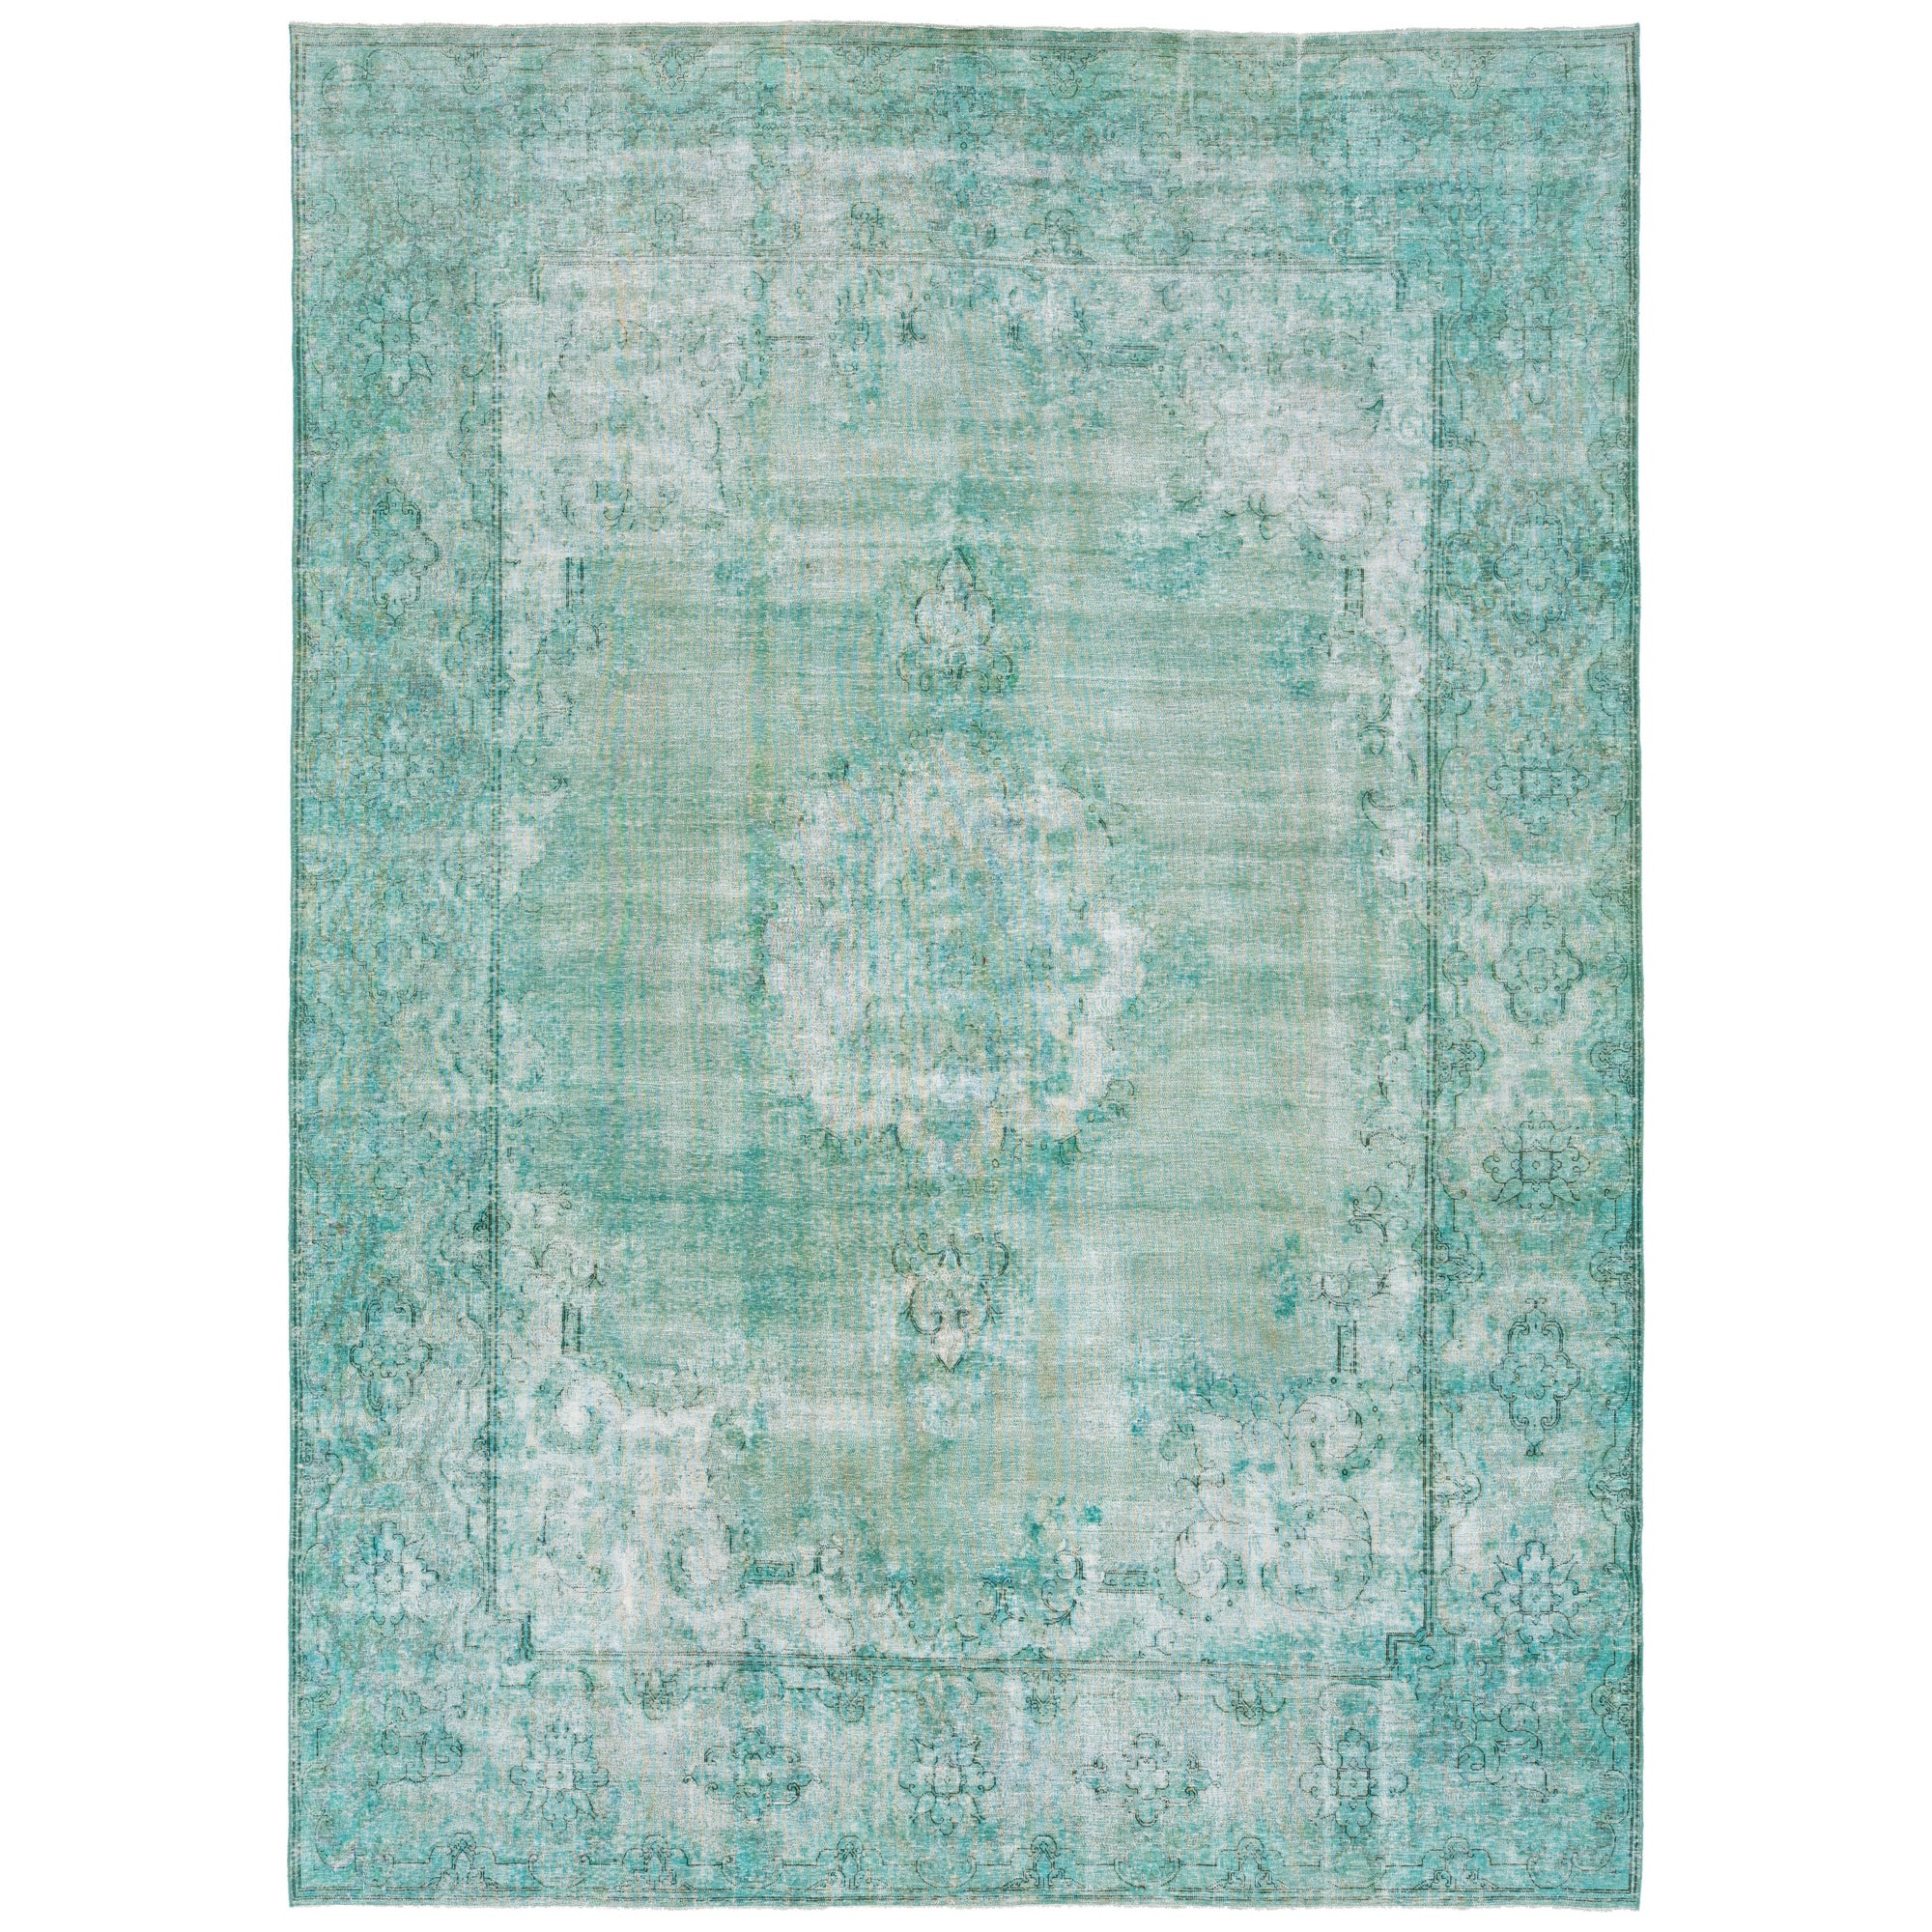   Antique Overdyed Wool Rug With Allover Motif In Light Green For Sale